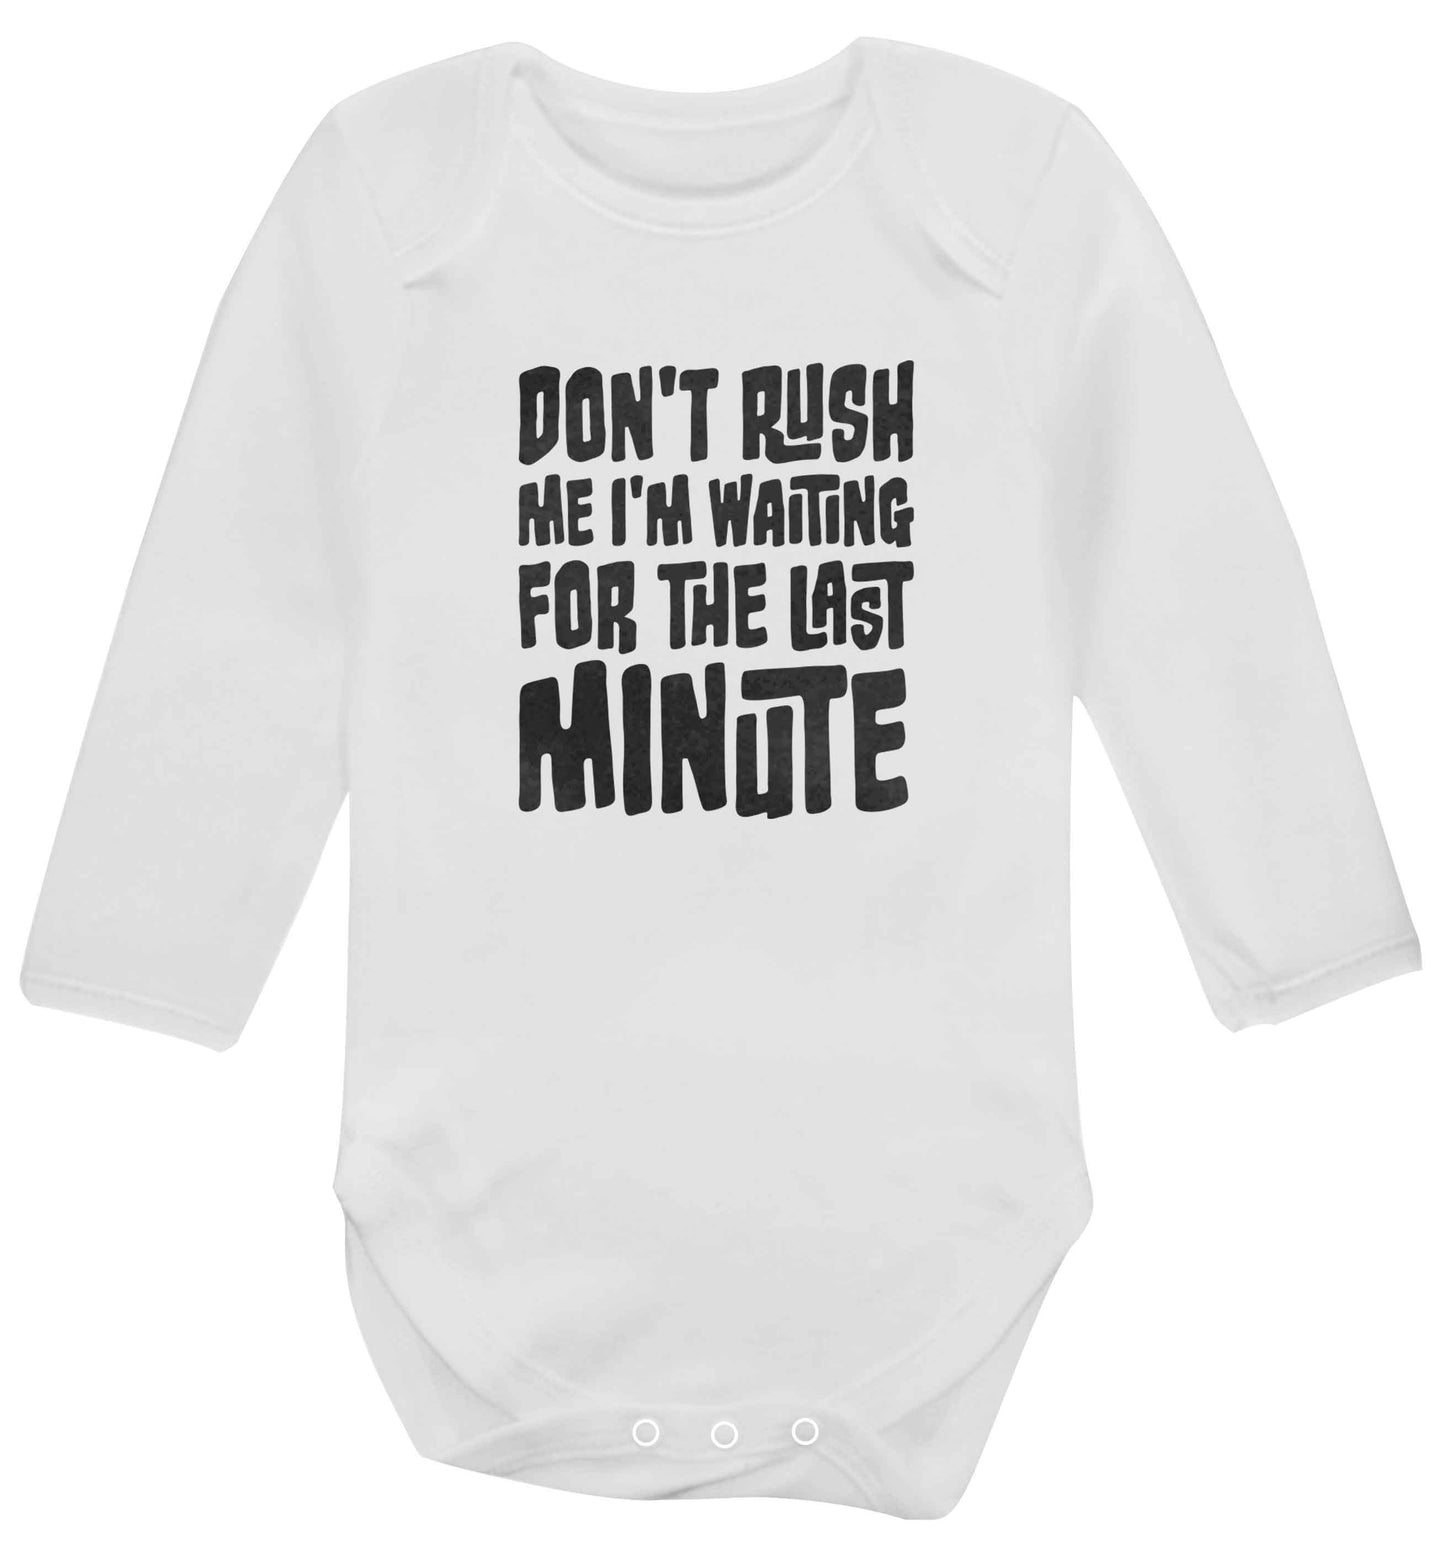 Don't rush me I'm waiting for the last minute baby vest long sleeved white 6-12 months